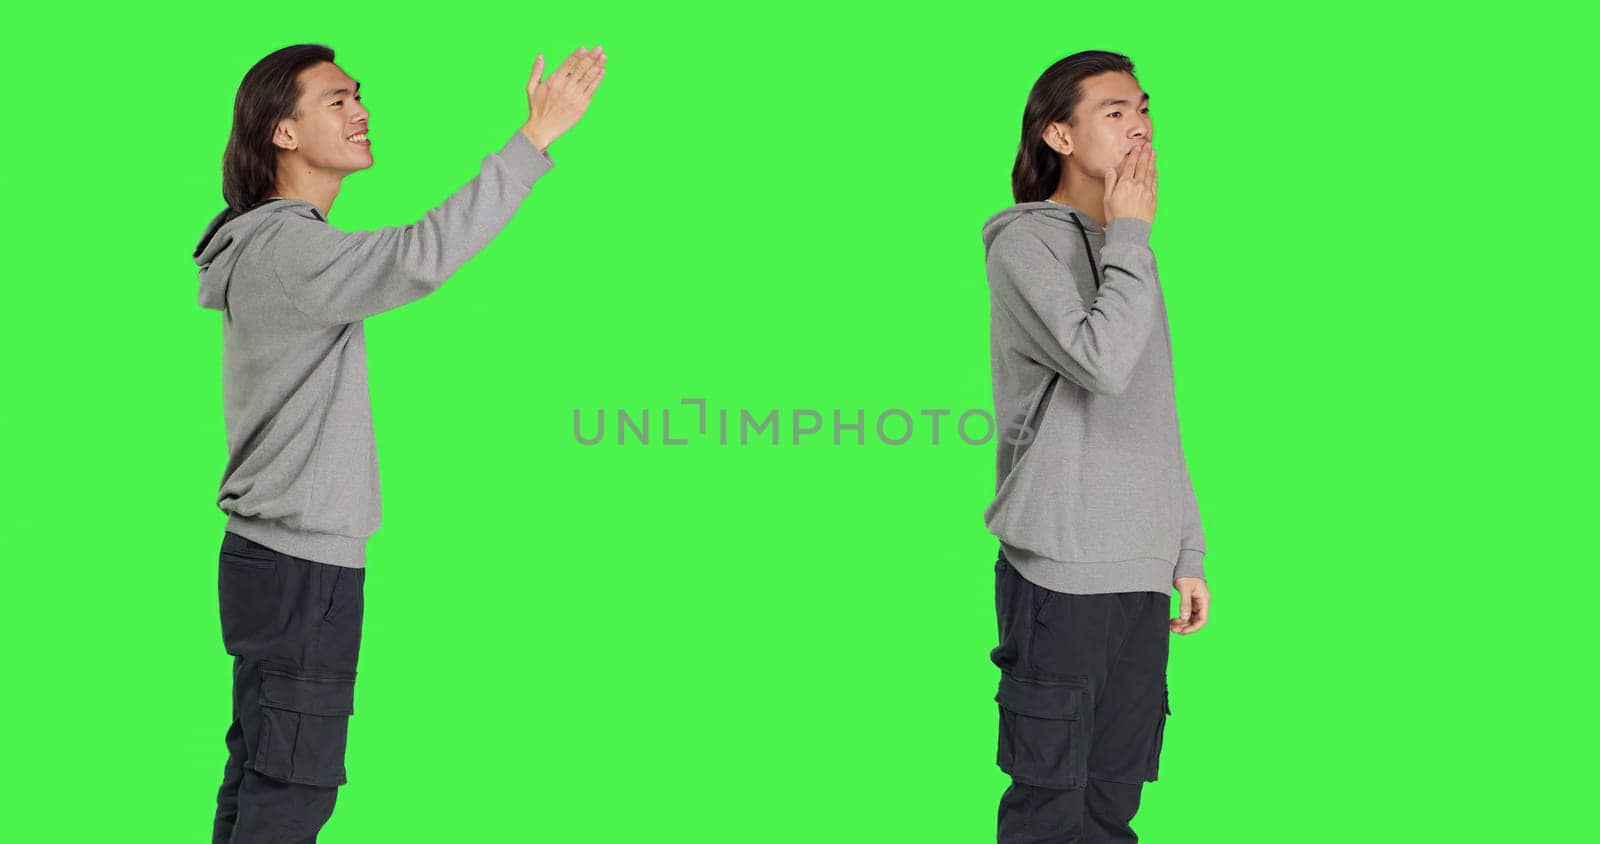 Asian guy sending air kisses on camera, acting romantic and cute standing against greenscreen background studio. Young adult feeling confident and joyful showing true honest emotions.